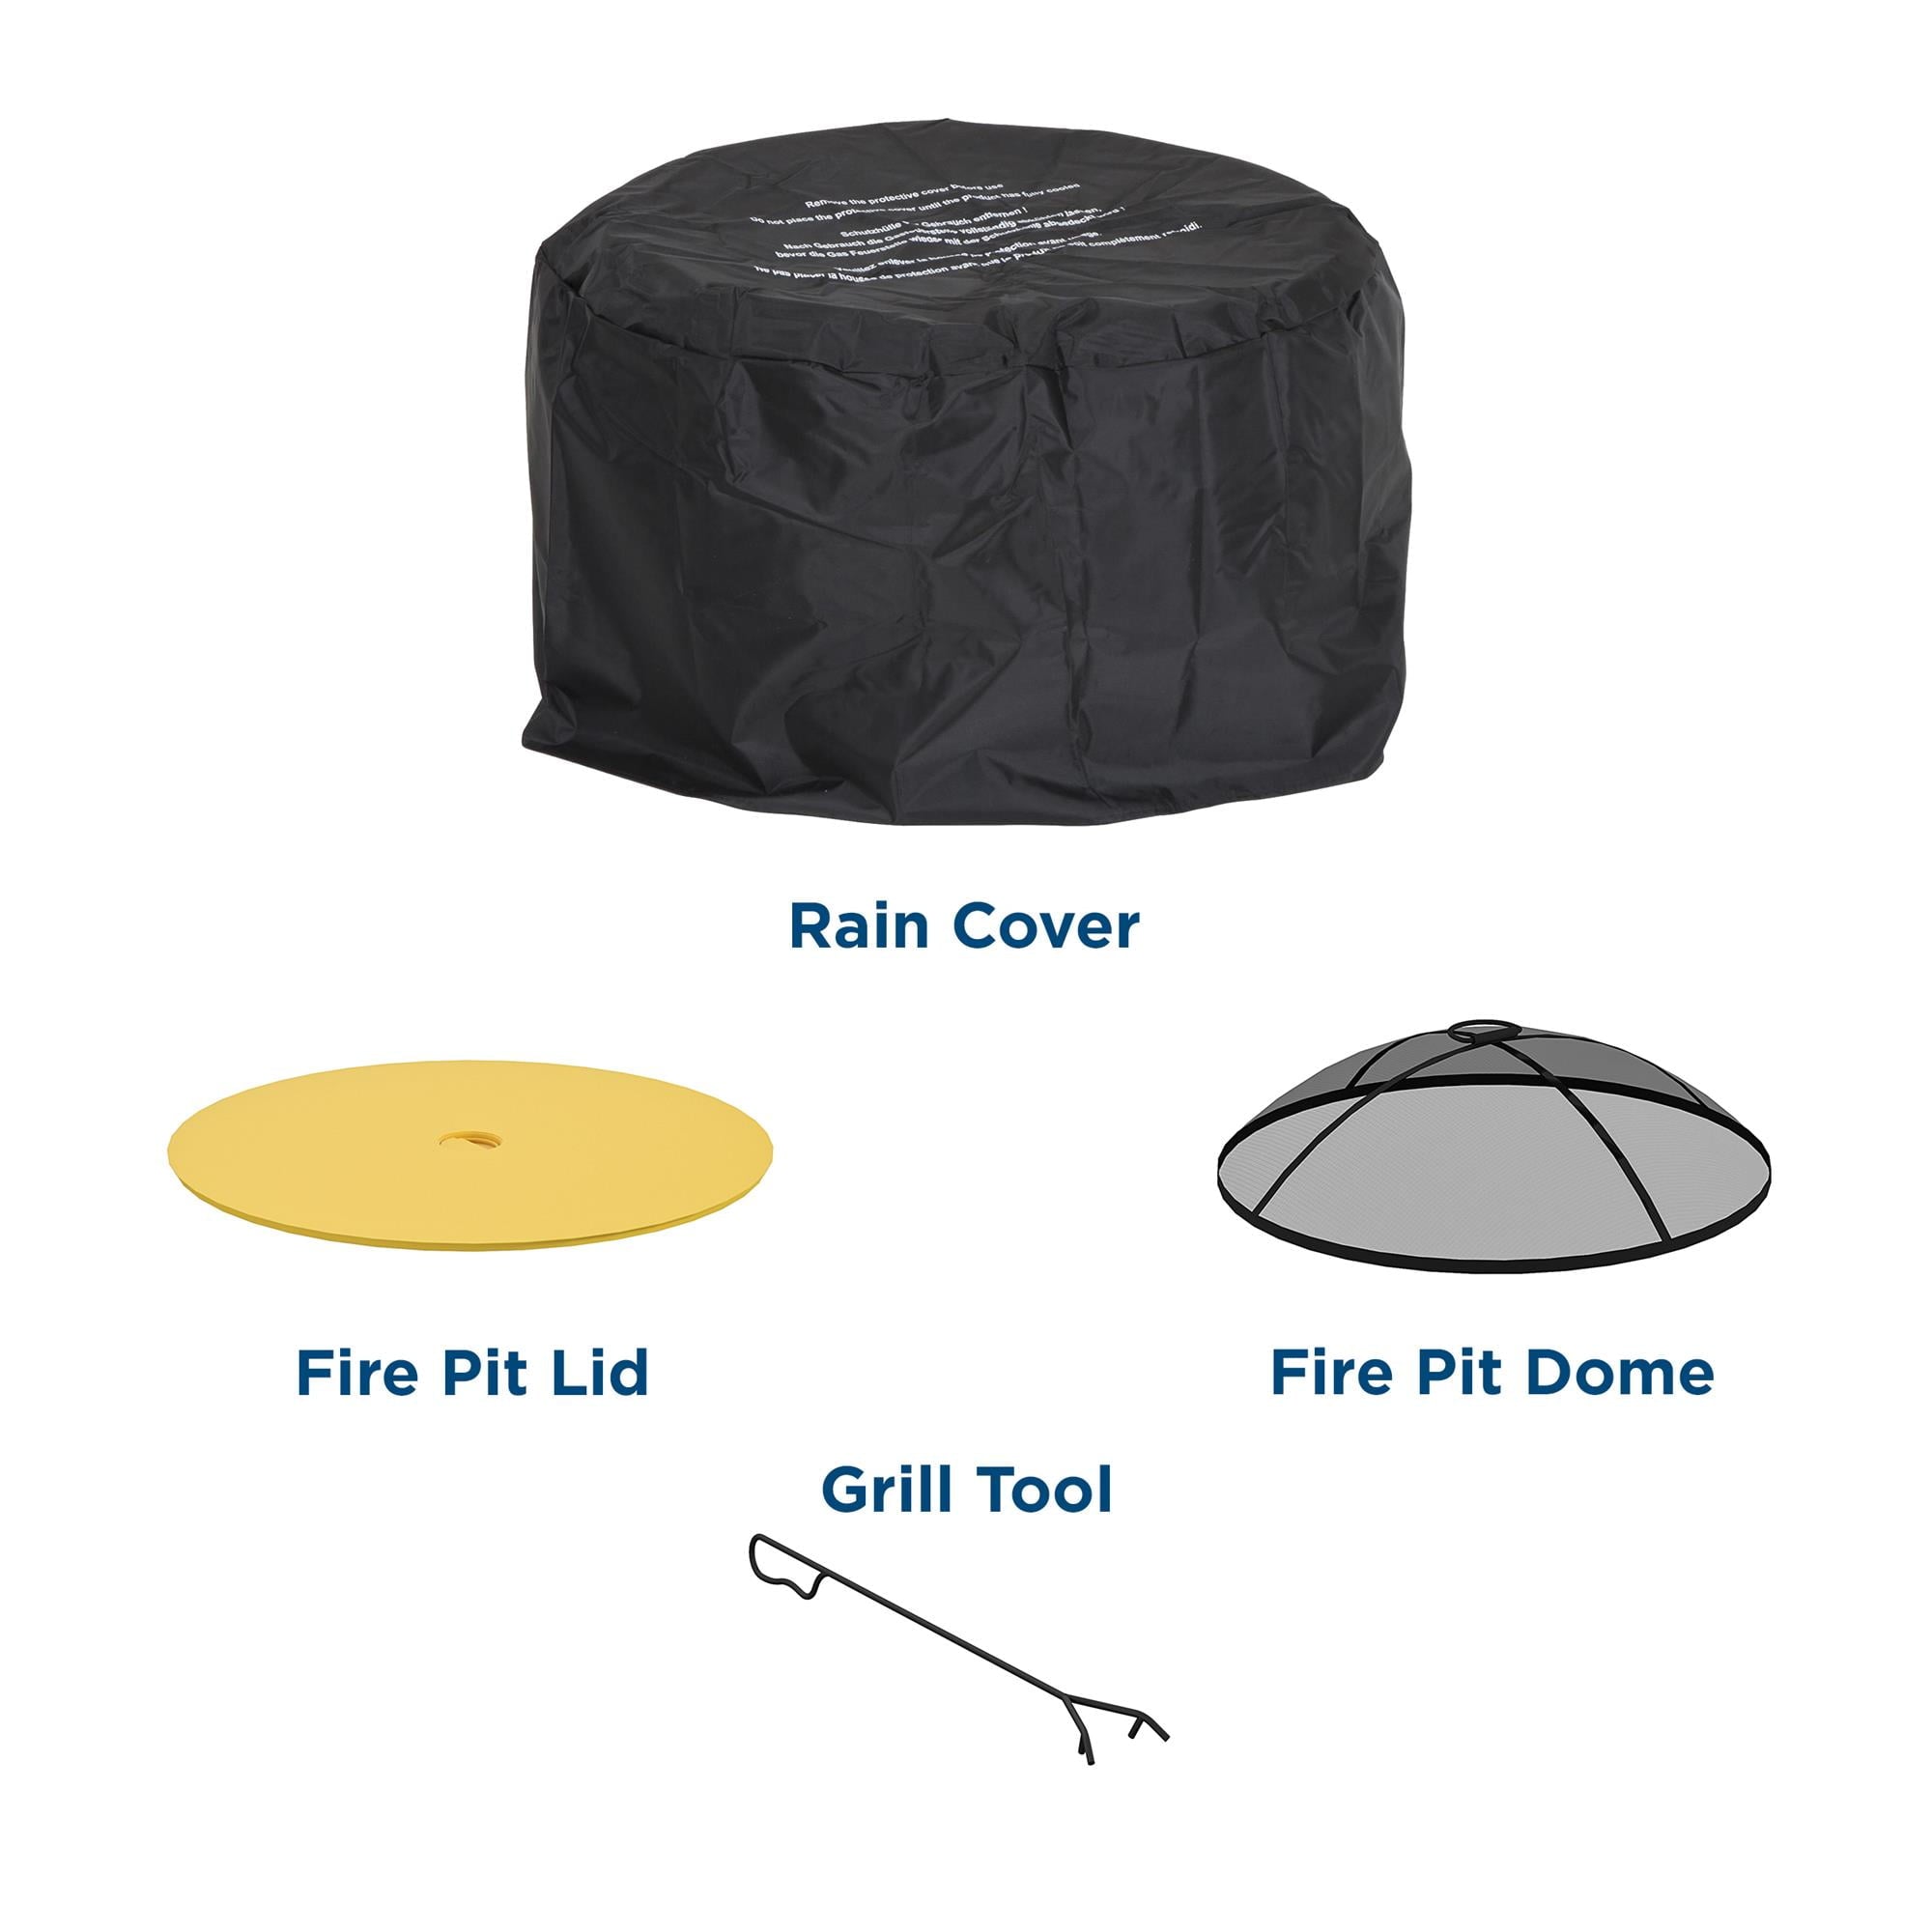 COSCO Outdoor 23" Round Wood Burning Fire Pit with Rain Cover and Accessories, Steel, Yellow